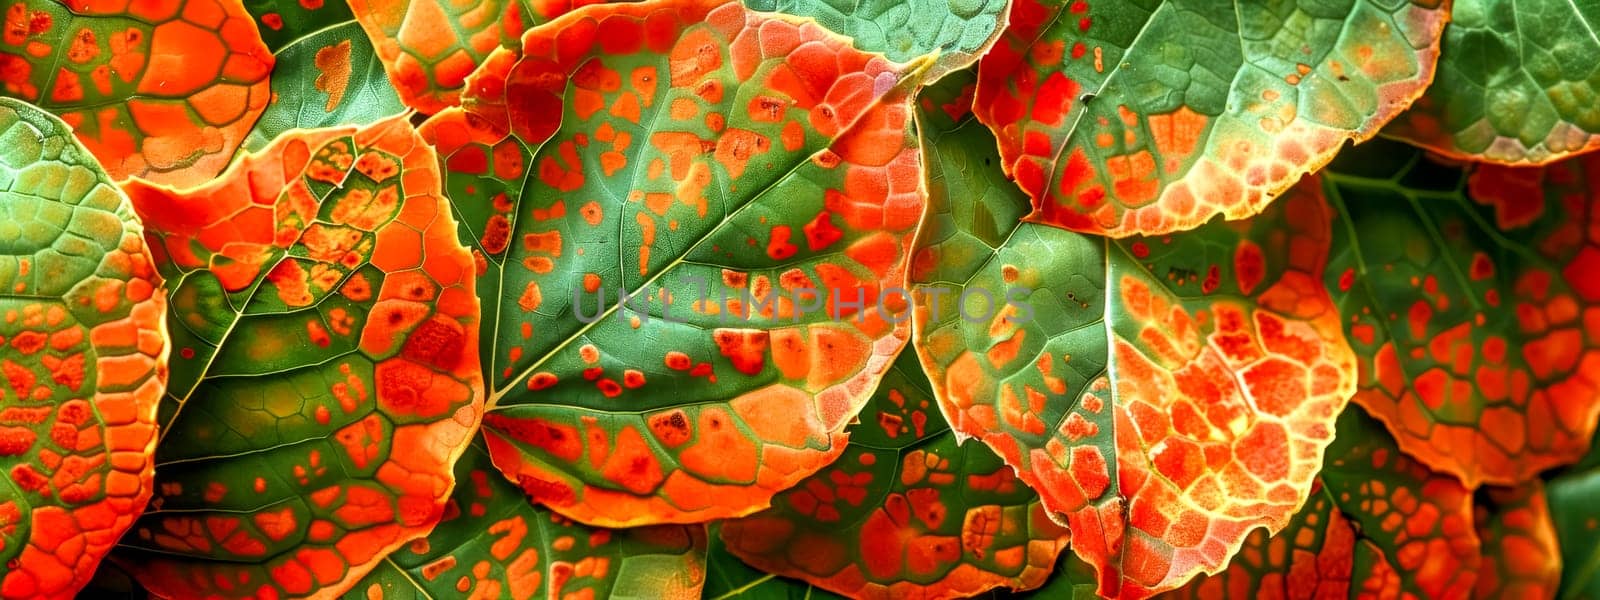 Close-up of colorful autumn leaves with intricate patterns by Edophoto